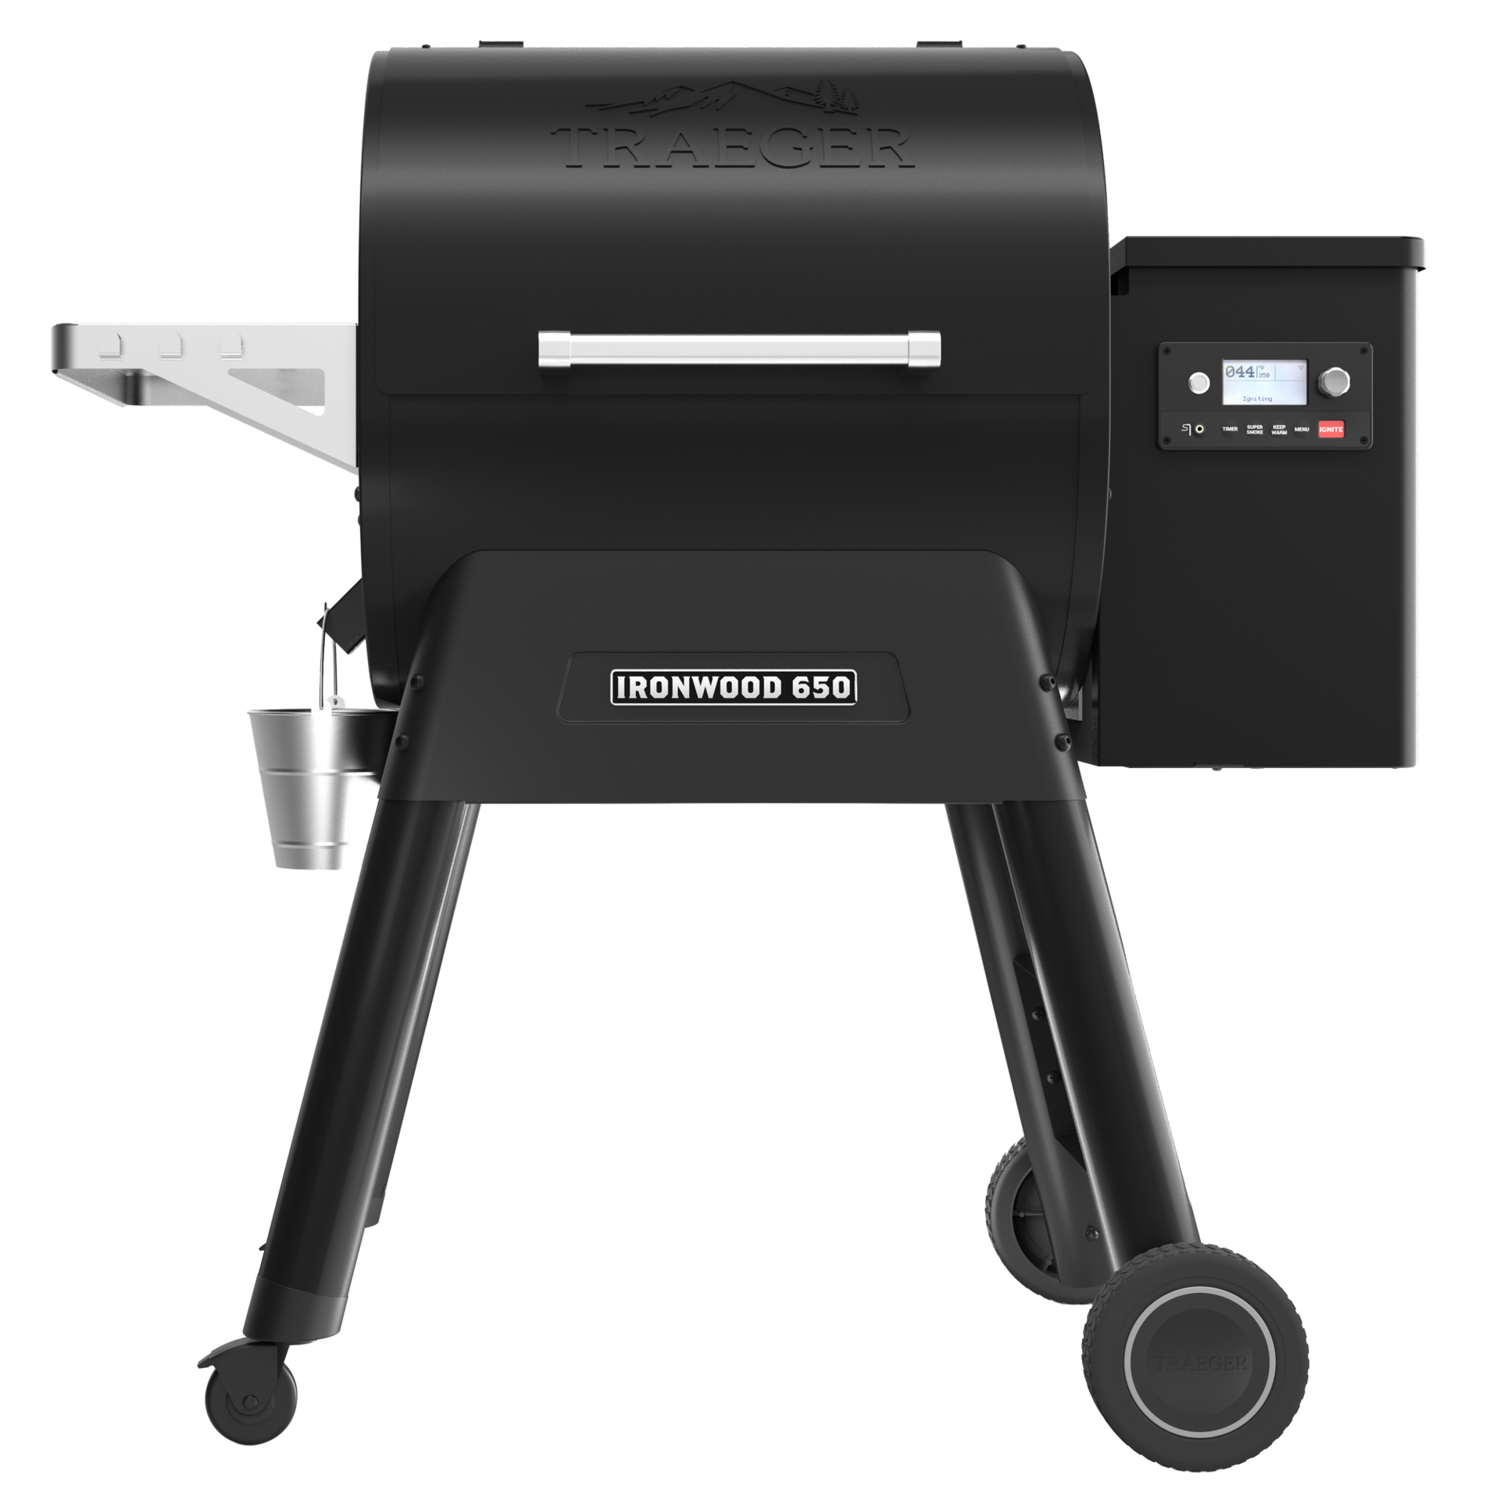 Traeger Ironwood 650 Pellet Grill (Includes Front Shelf & Cover) £1199